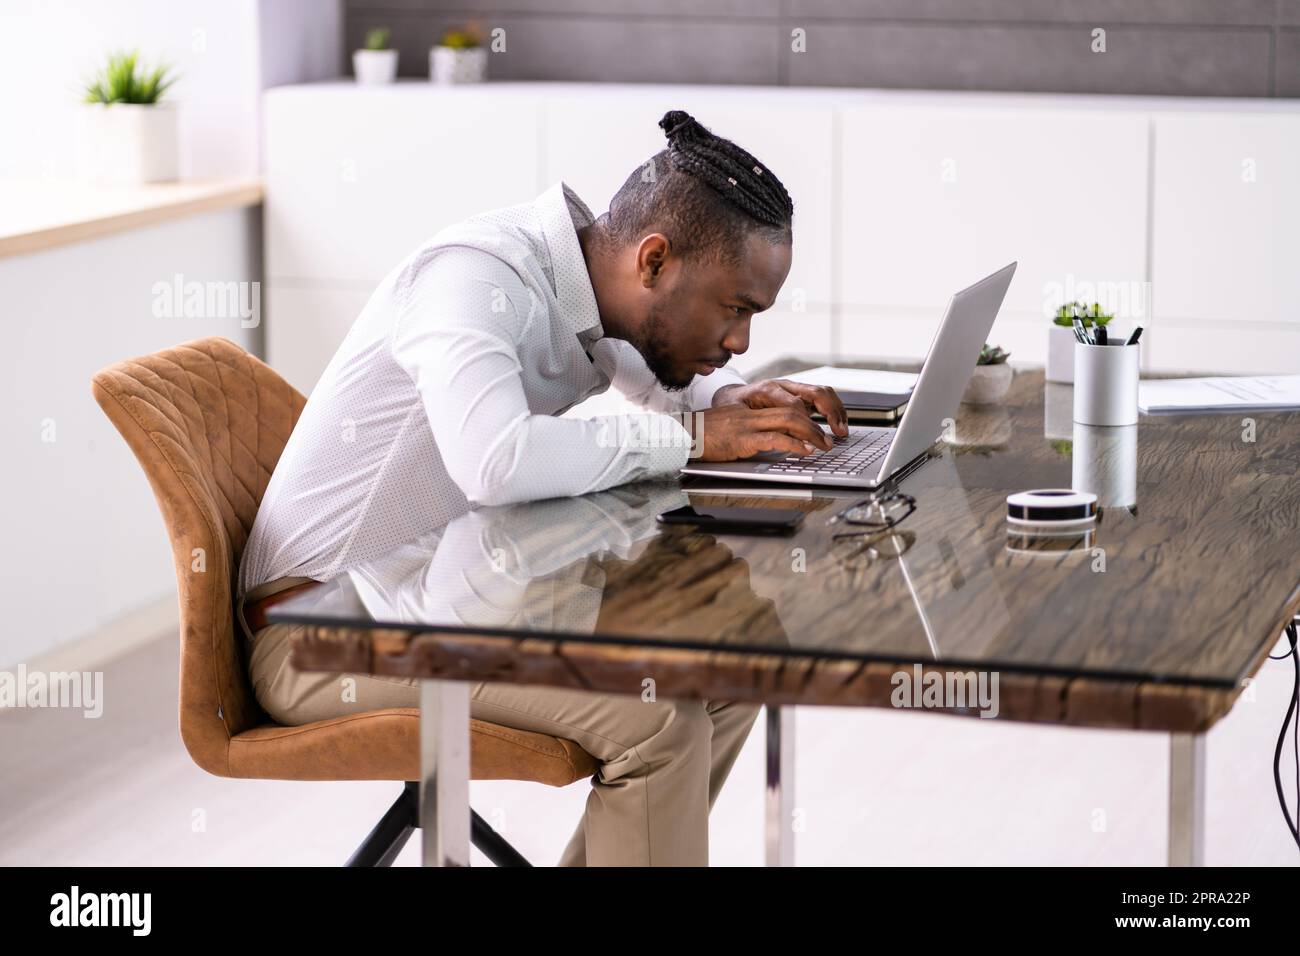 African Man Bad Posture Working Typing Stock Photo